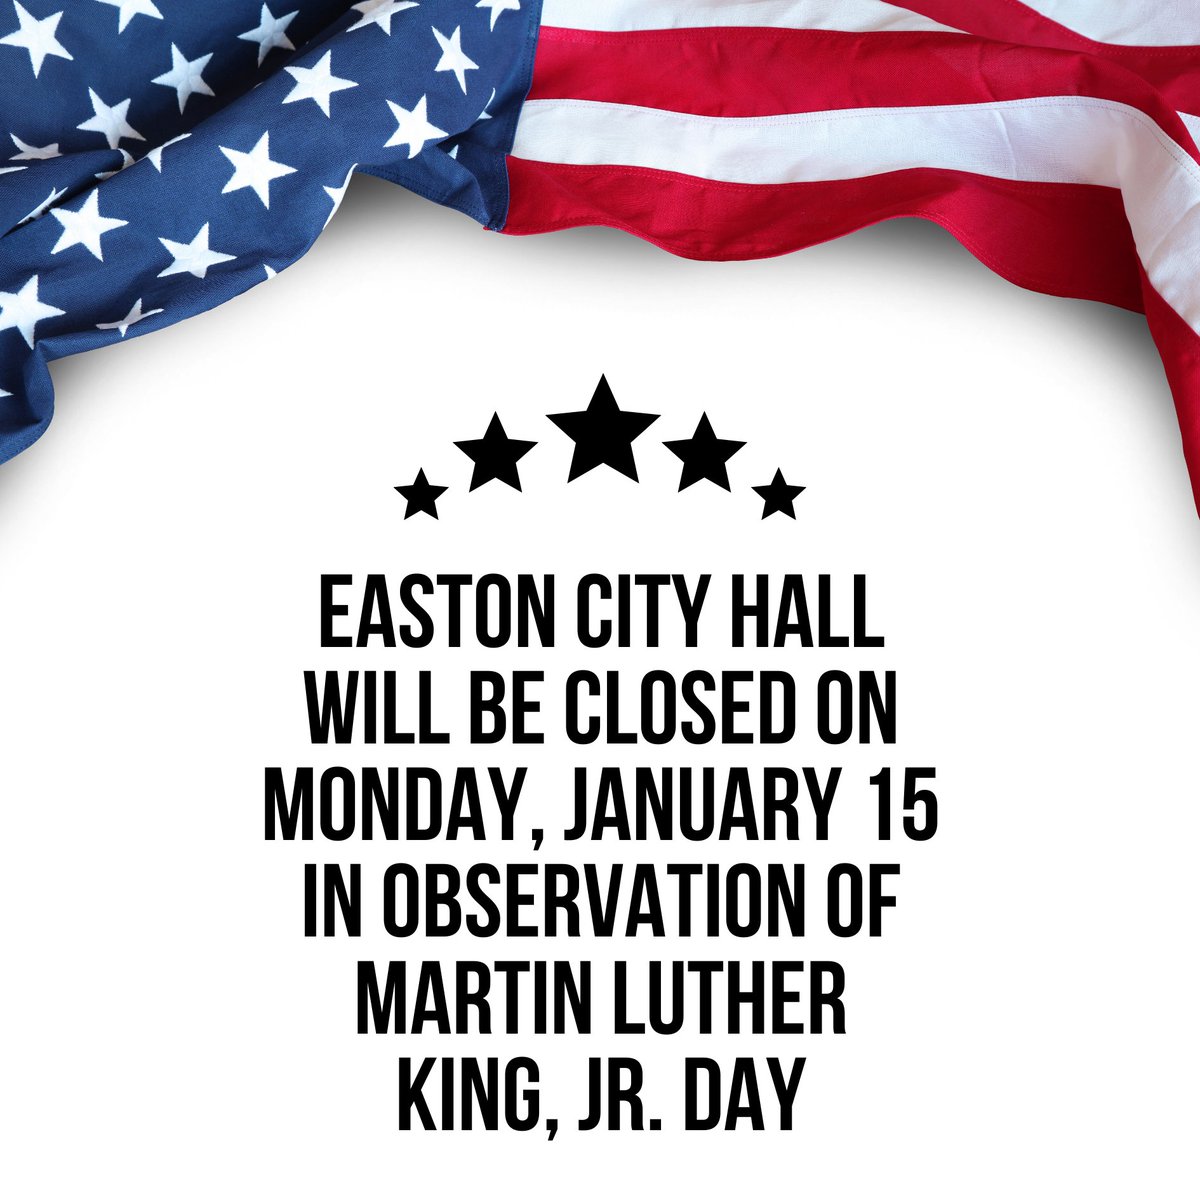 Tomorrow 1/12 is the last day City Hall will be open until next Tuesday as it is closed next Monday for the holiday. If you need to reach our staff, please contact us before 4:30 pm on Friday. easton-pa.com